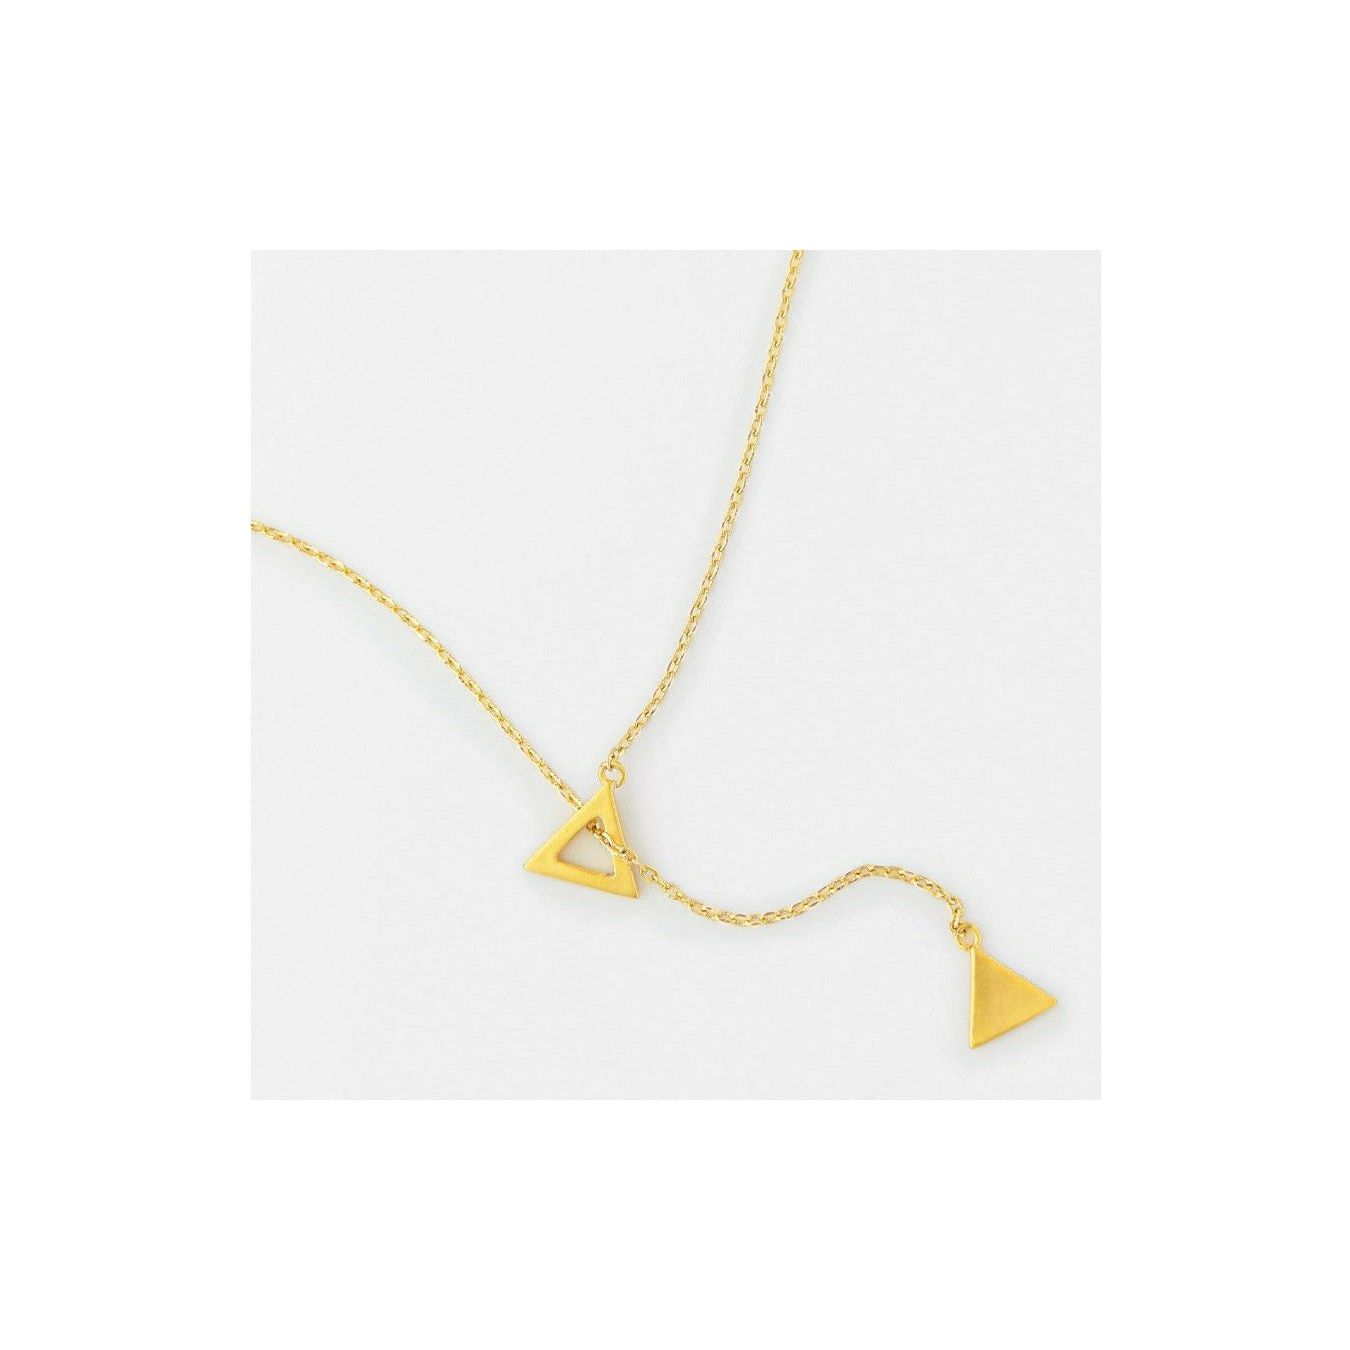 Tassel Triangle Necklace